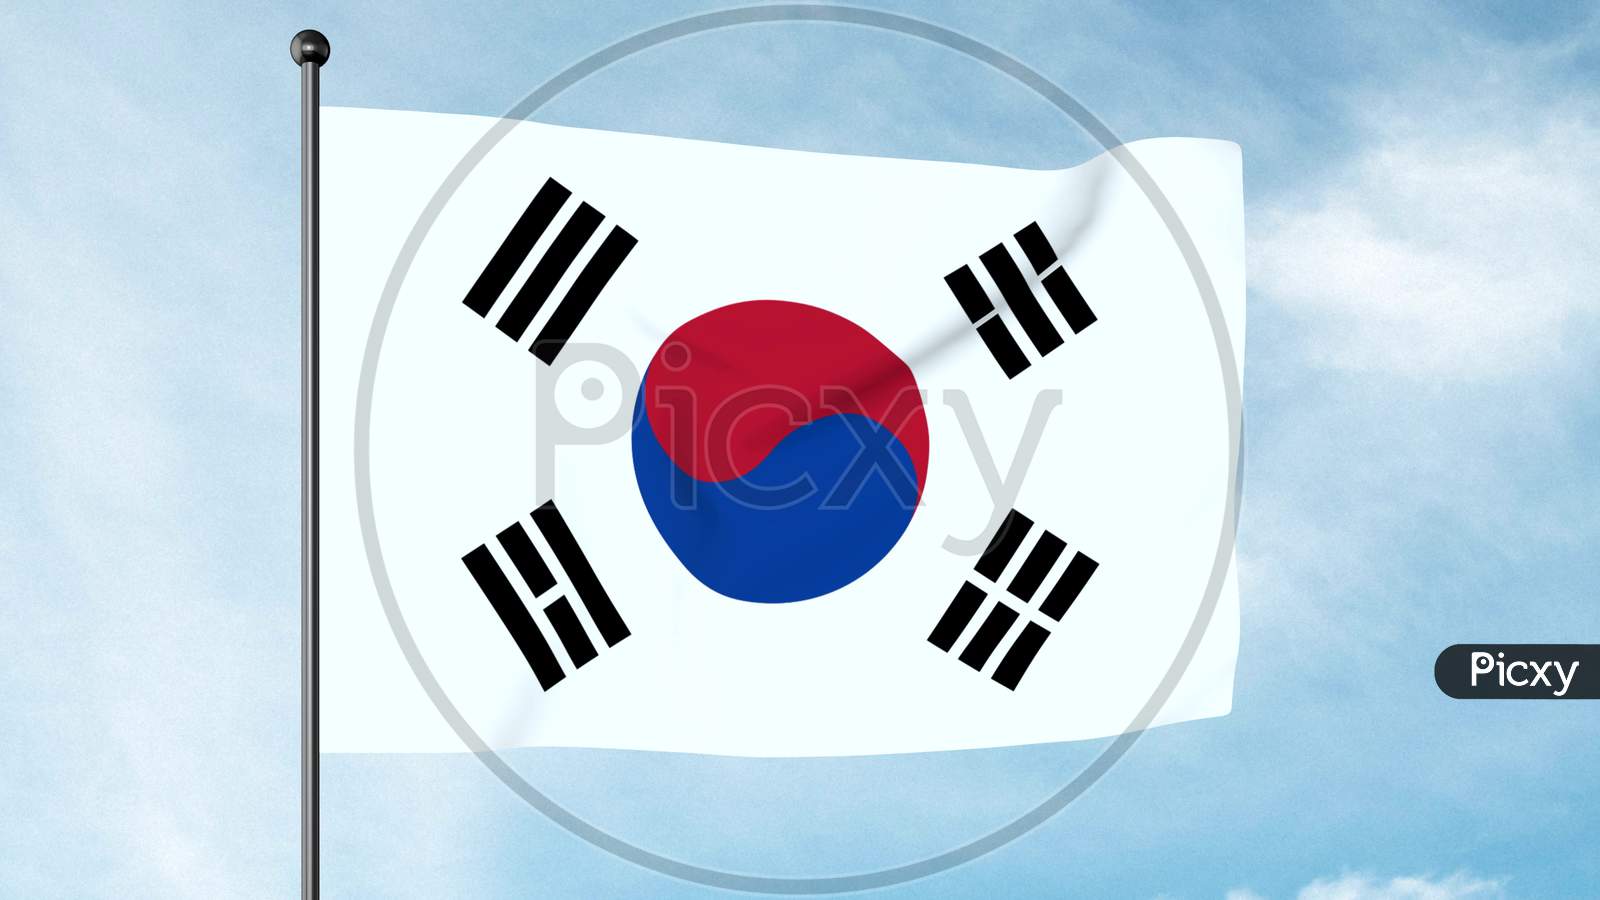 3D Illustration Of The Flag Of South Korea, The Taegukgi, Has Three Parts: A White Rectangular Background, A Red And Blue Taegeuk In Its Centre, And Four Black Trigrams, One In Each Corner.